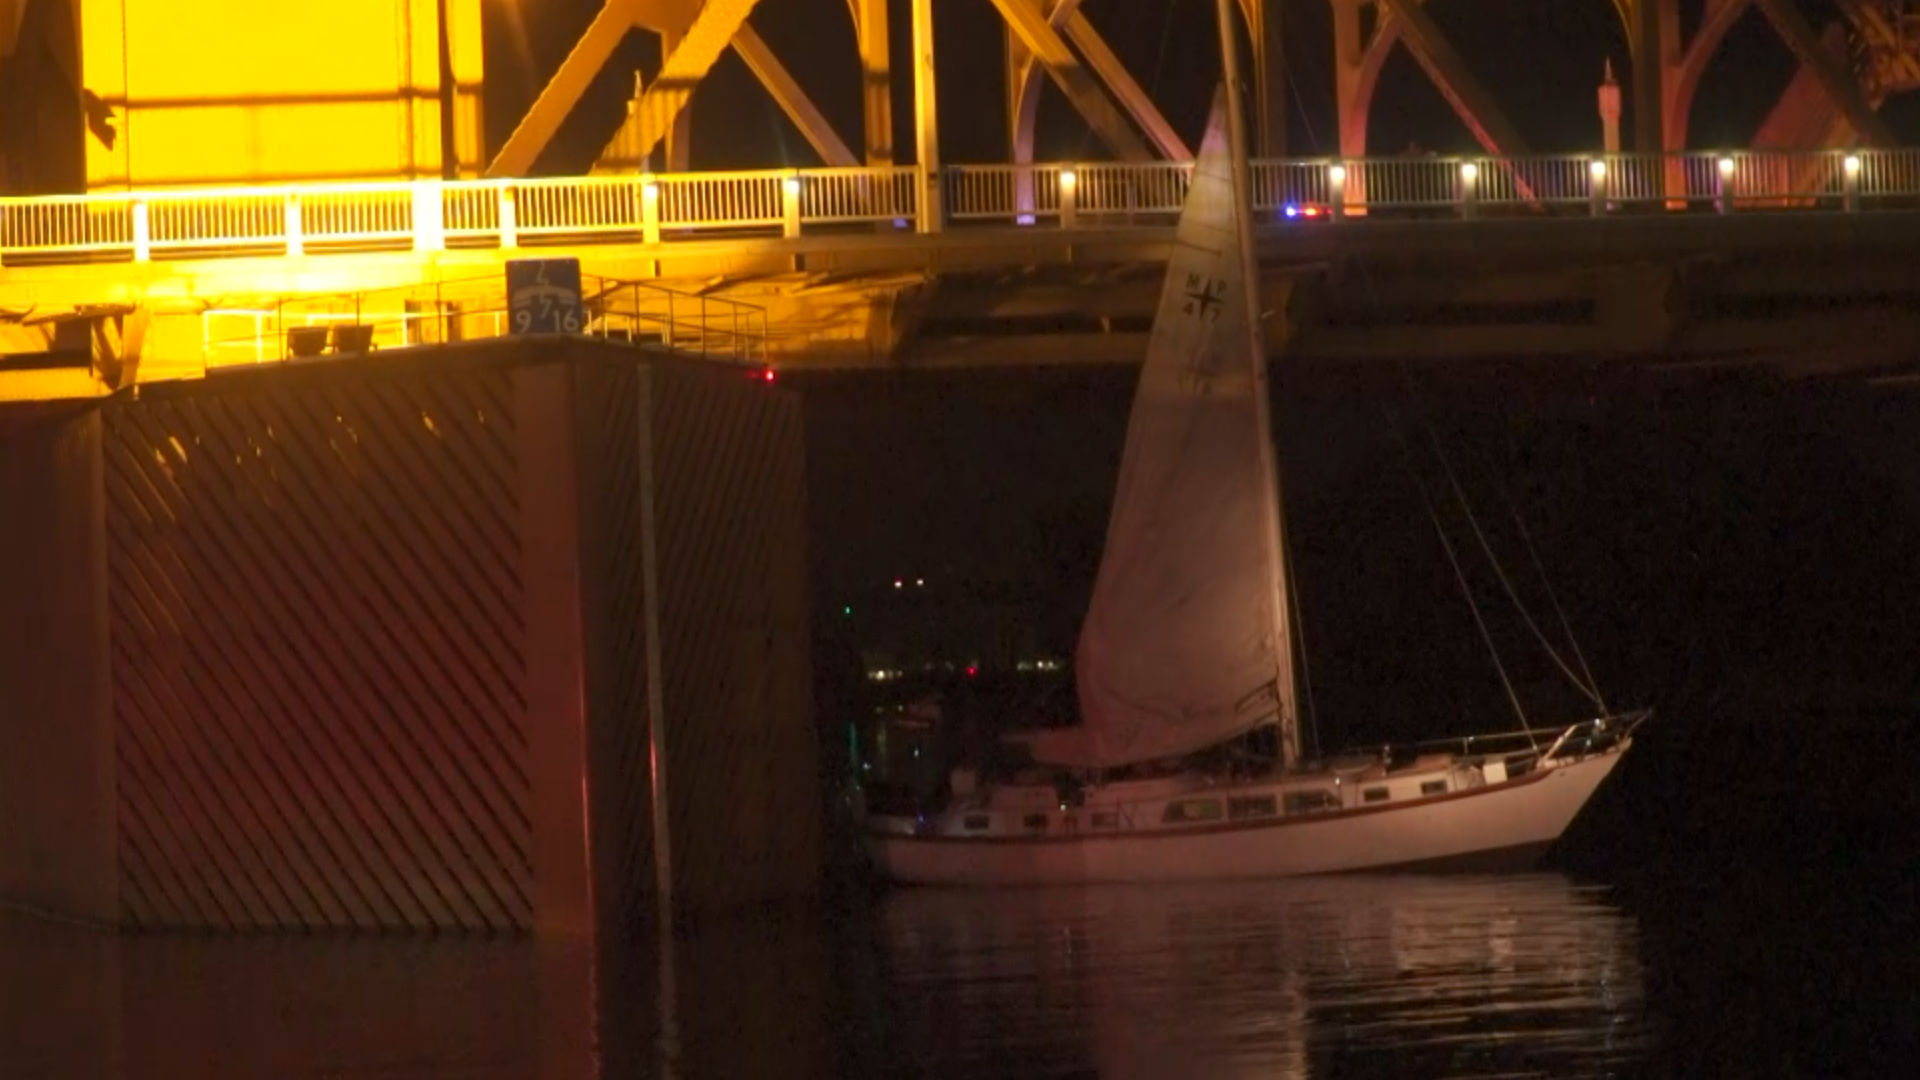 Sacramento police said the suspect in the boat theft has been detained.